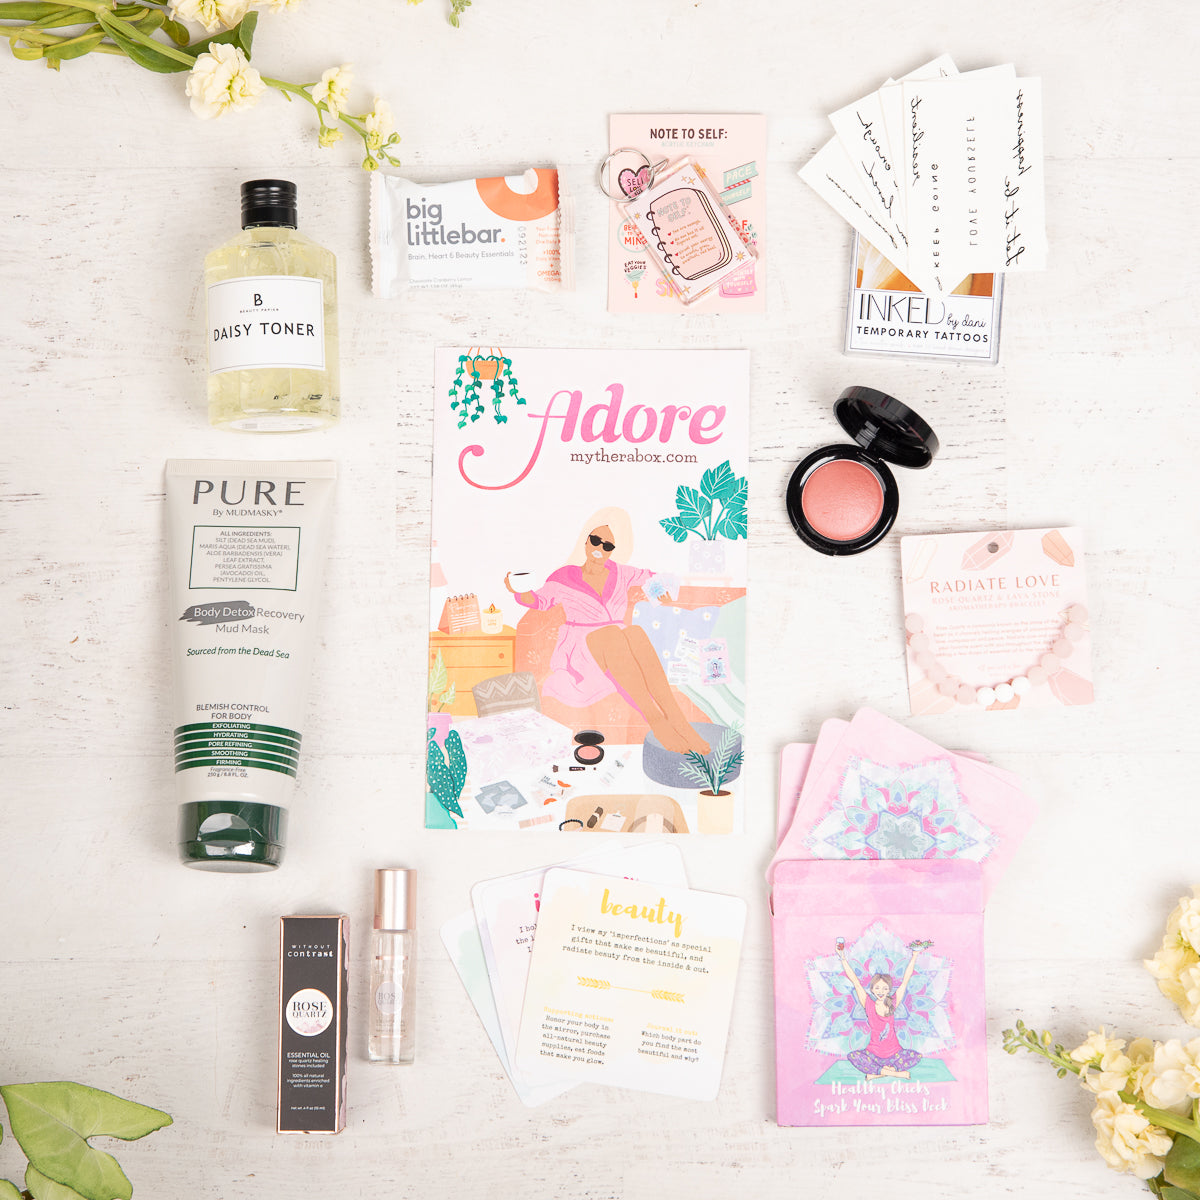 Therabox adore box featuring 9 self care items ranging from bath and body to skincare items